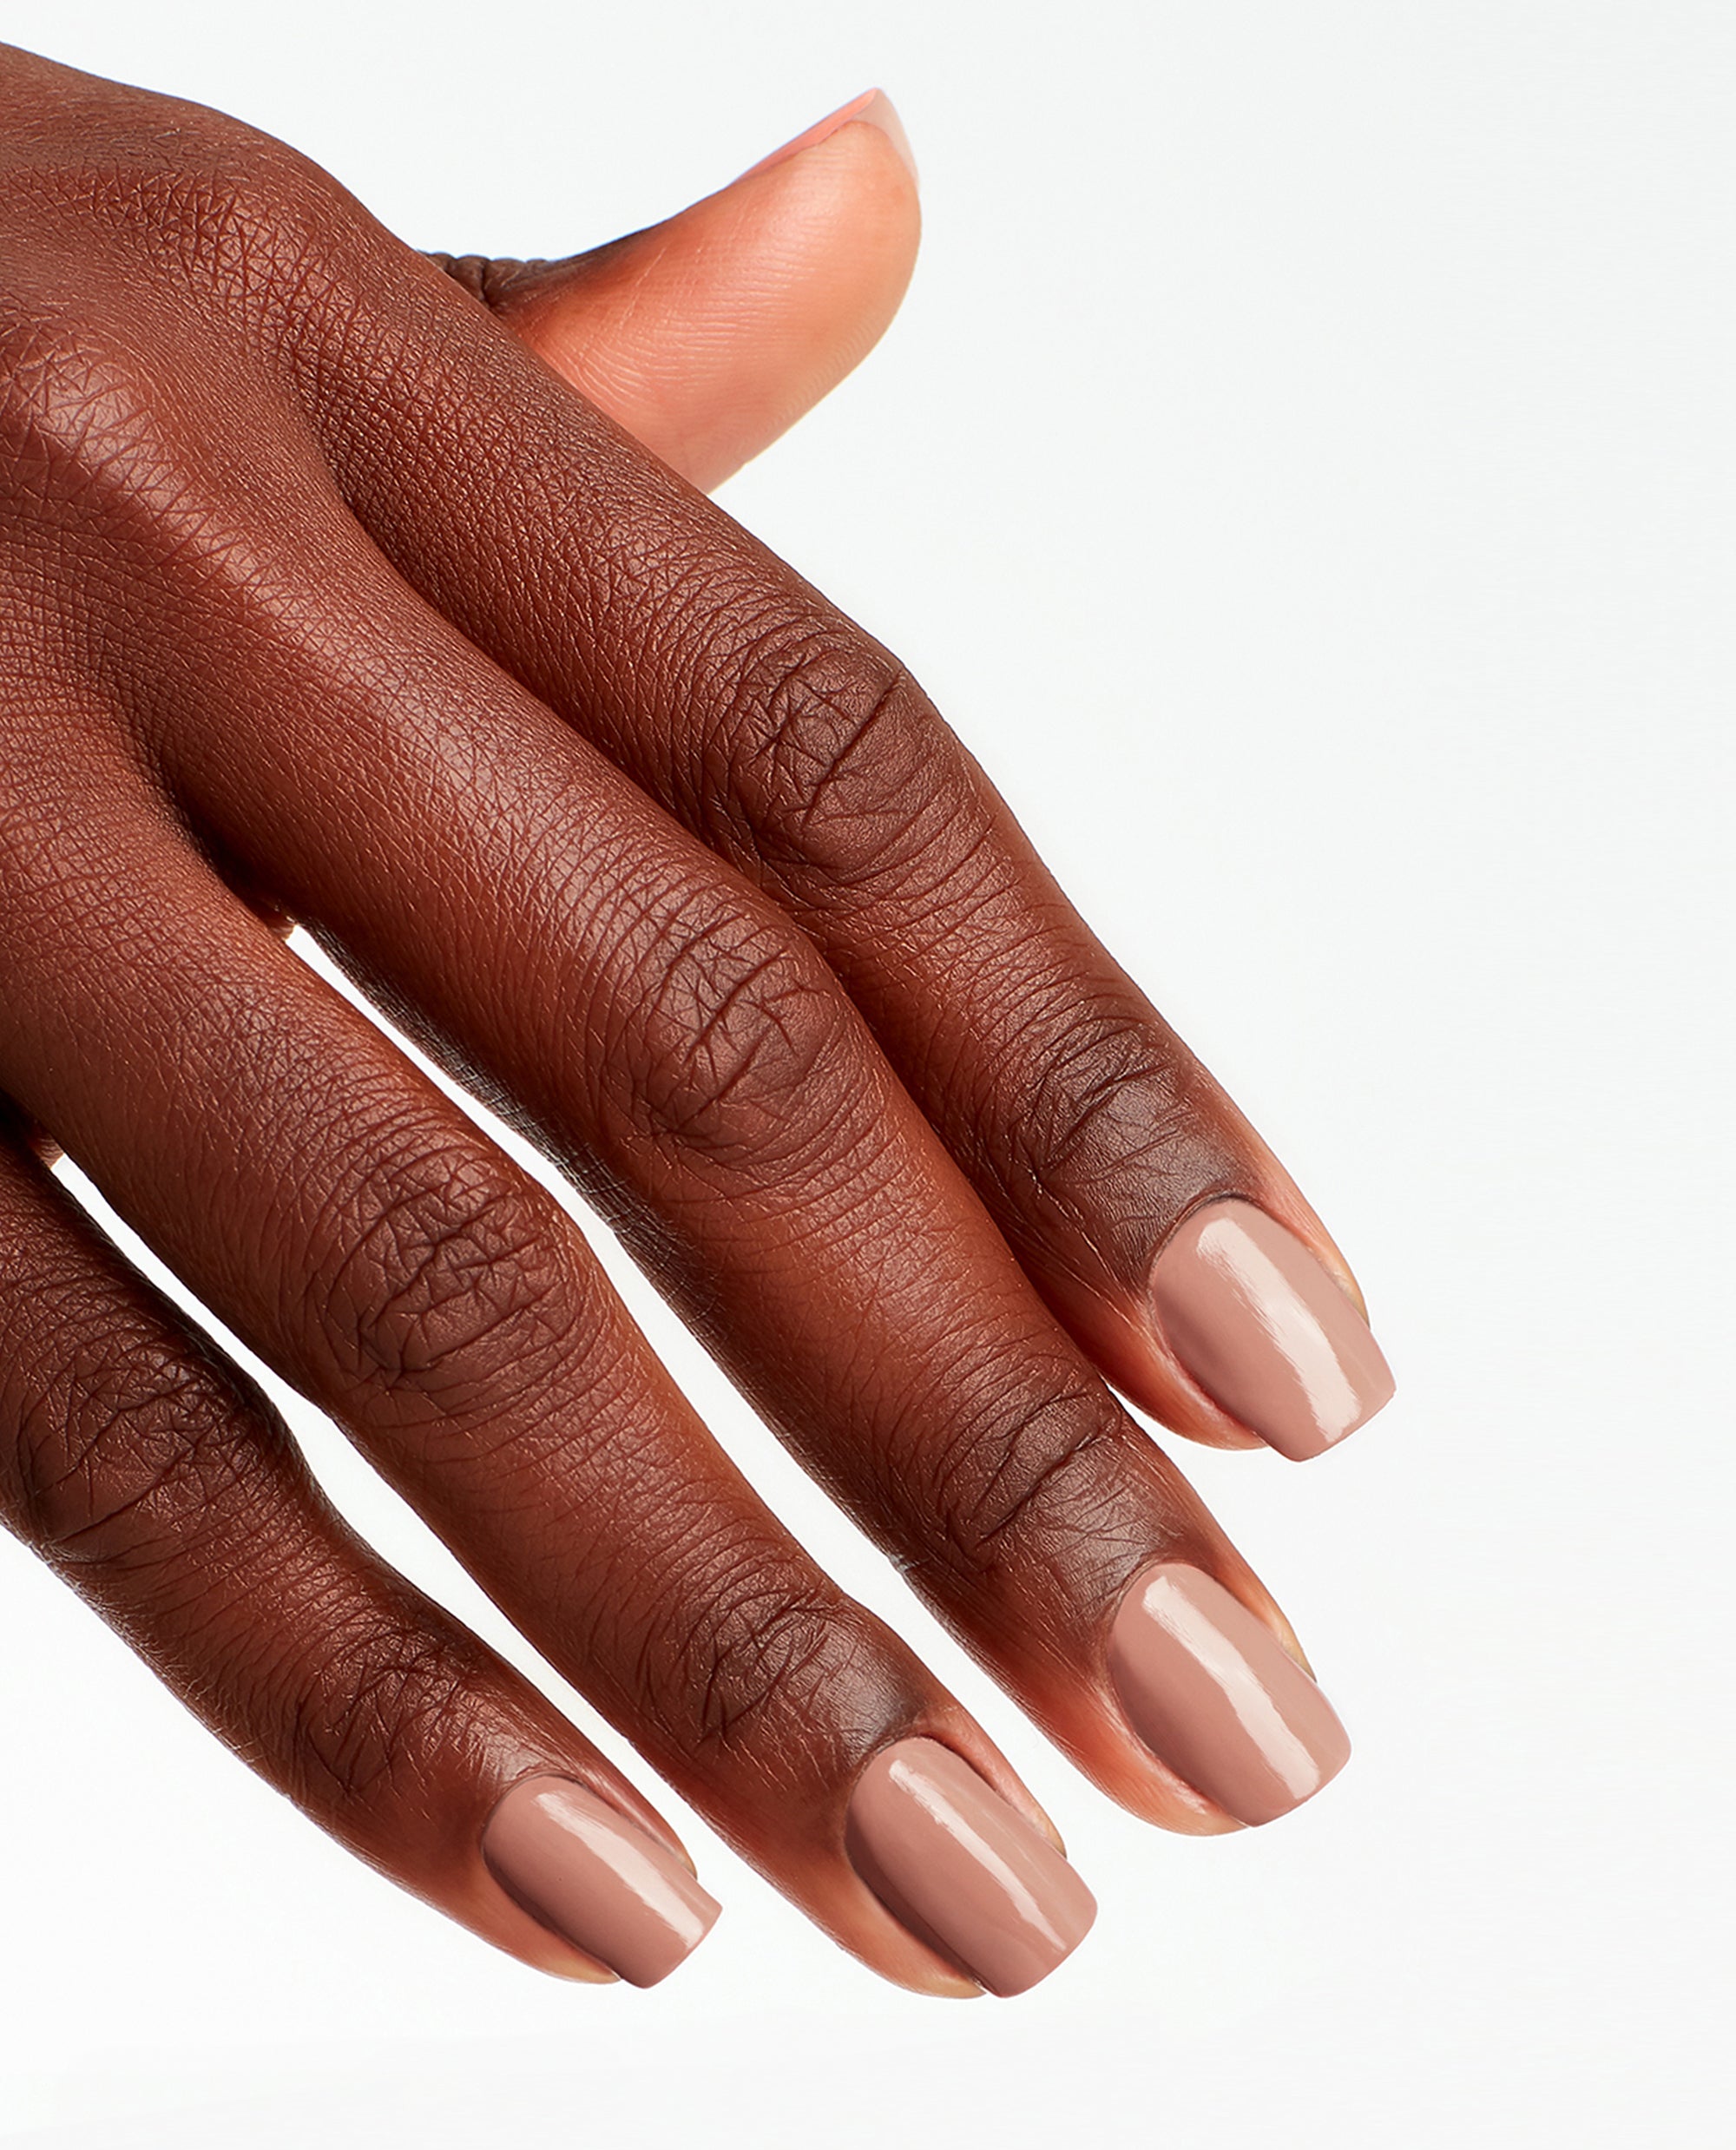 IN THE NUDE Matte Neutral Beige Nail Polish, Natural Nails, Vegan and  Cruelty Free - Etsy